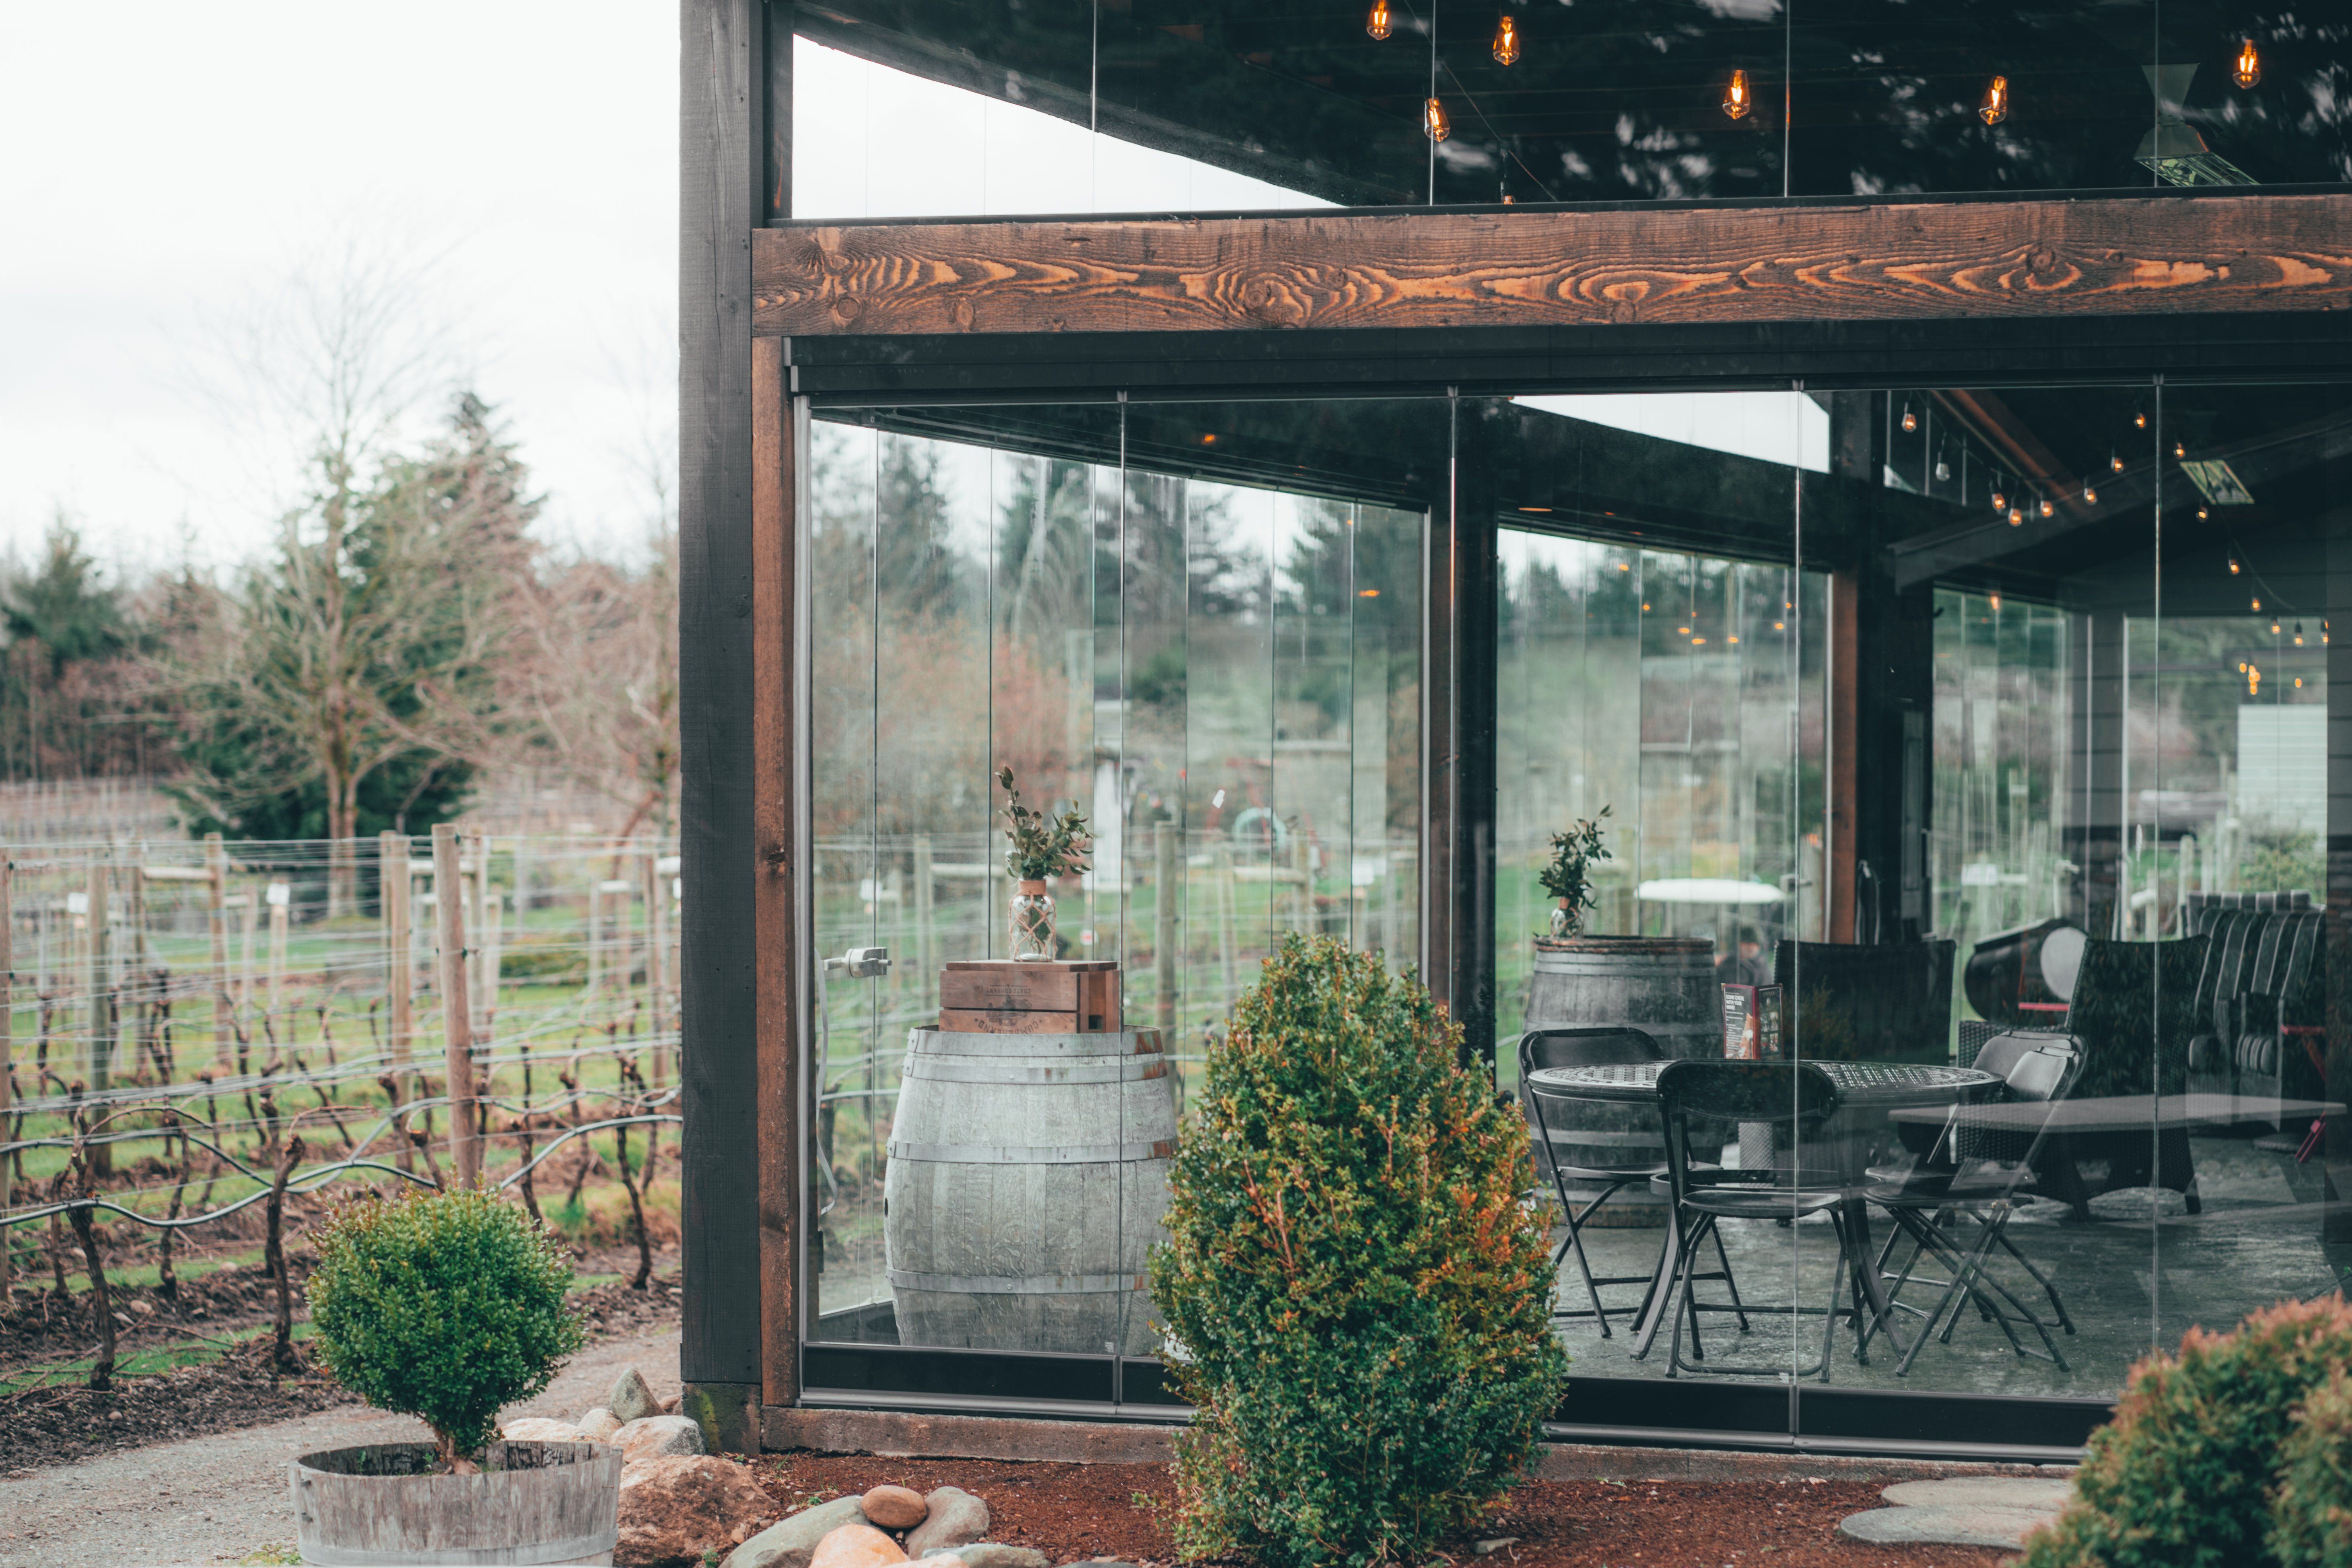 Glass sunroom enclosure for a patio at a winery